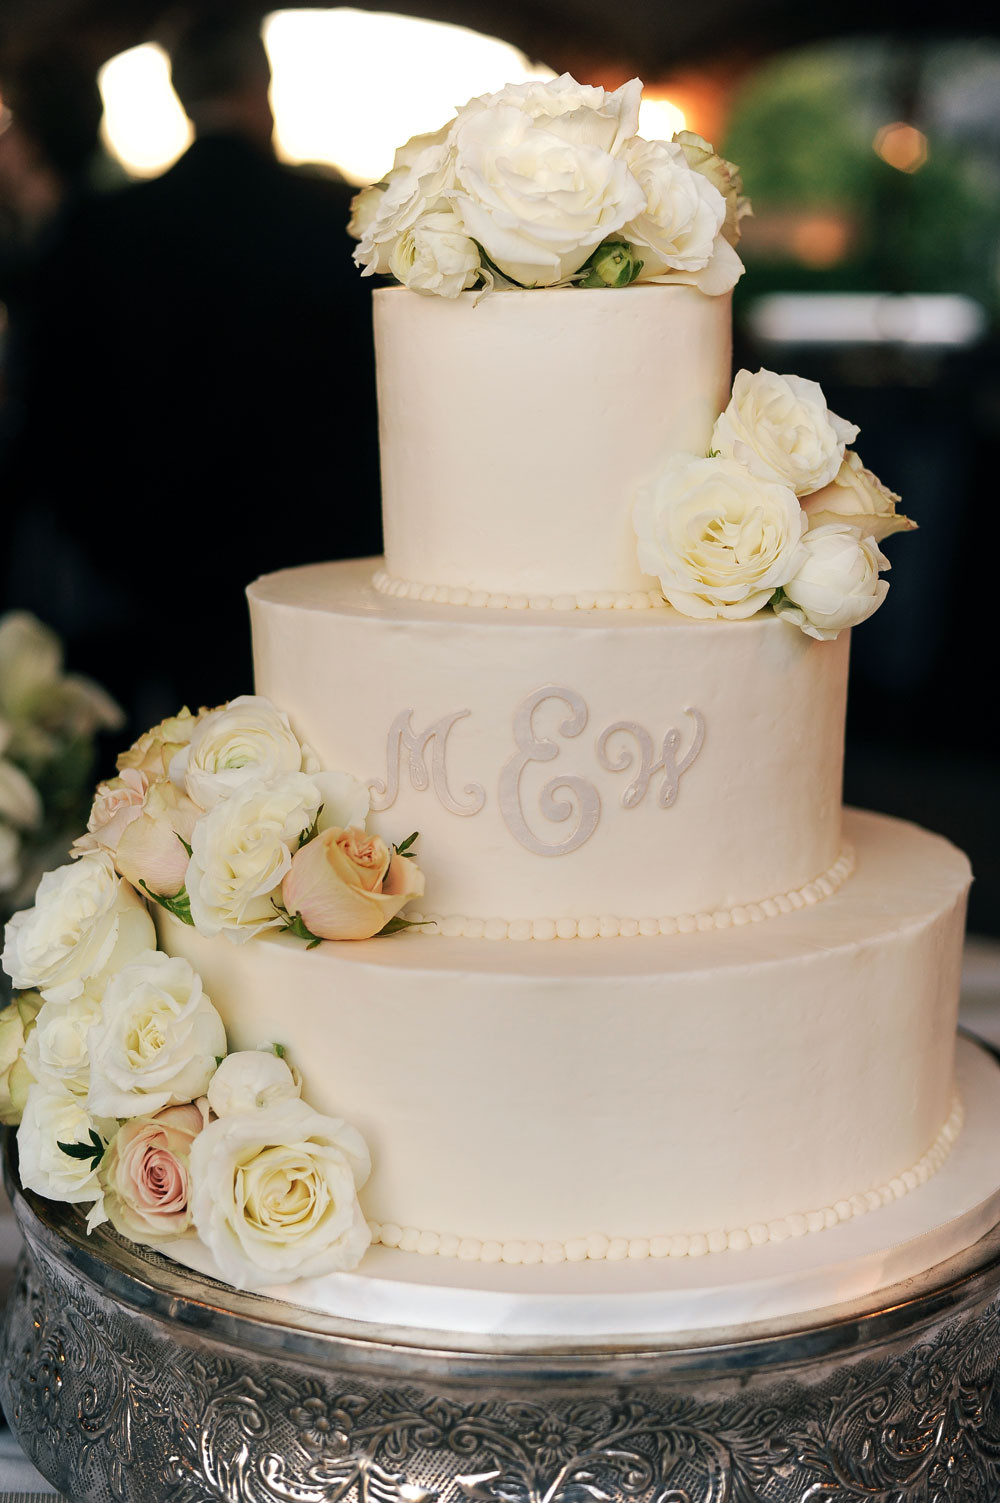 Picture Of Wedding Cakes
 Nico and LaLa Wedding Cake Inspiration